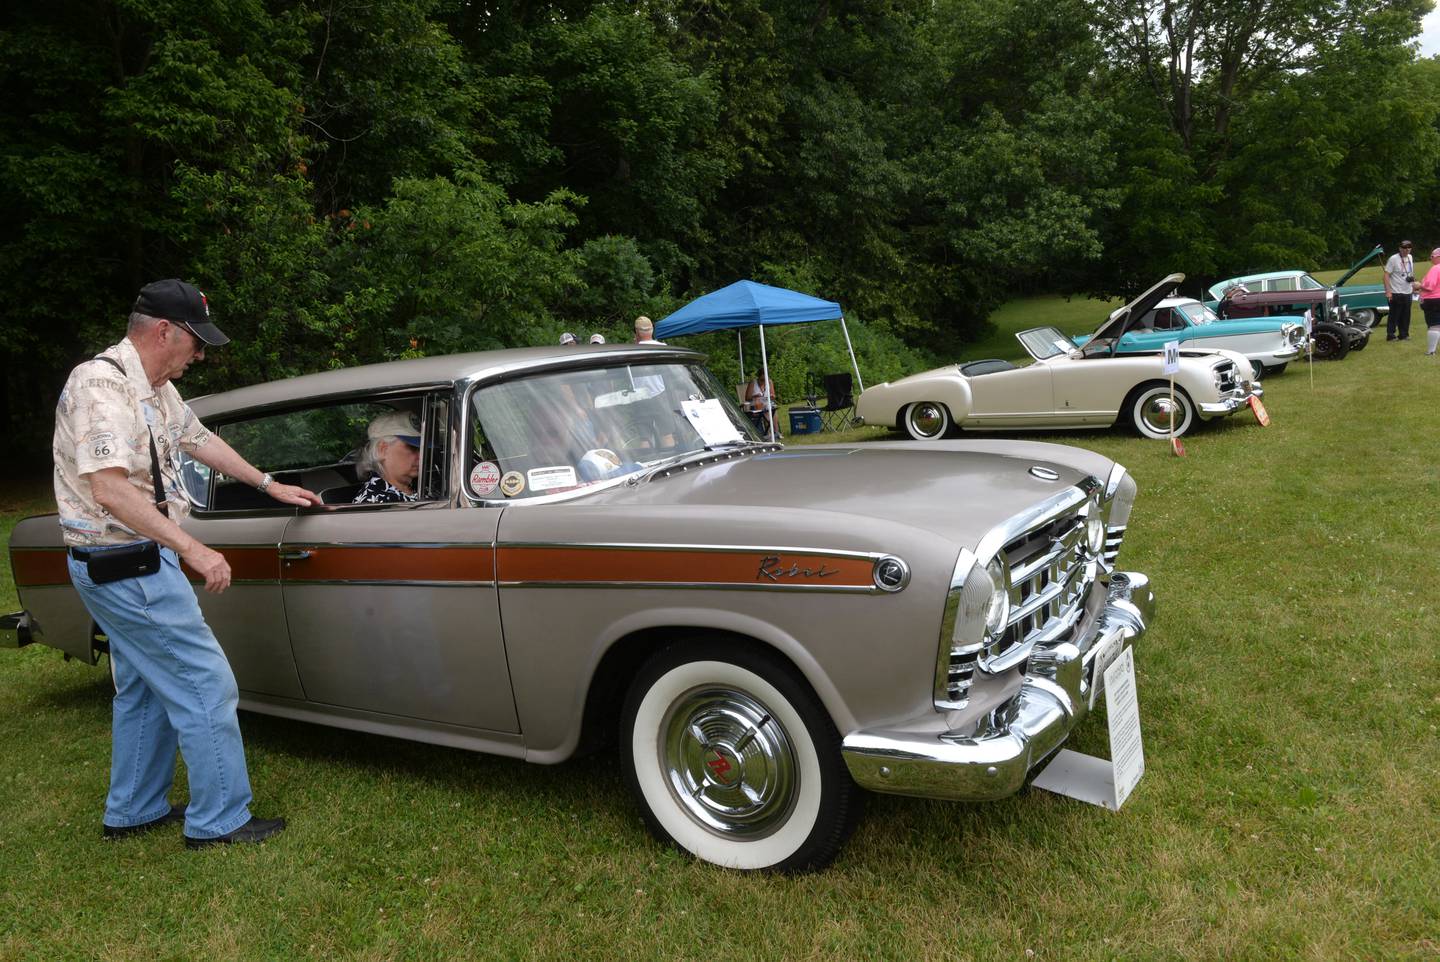 James Beymer of Henryetta, Oklahoma, visits Charlie and Maggie Wilson of Canton, Ohio, Wisconsin, as they attend the Nashional Car Show at Stronghold Camp & Retreat Center north of Oregon on Saturday, June 29, 2024. Beymer and the Wilsons both brought their 1957 Rambler Rebels to the show.